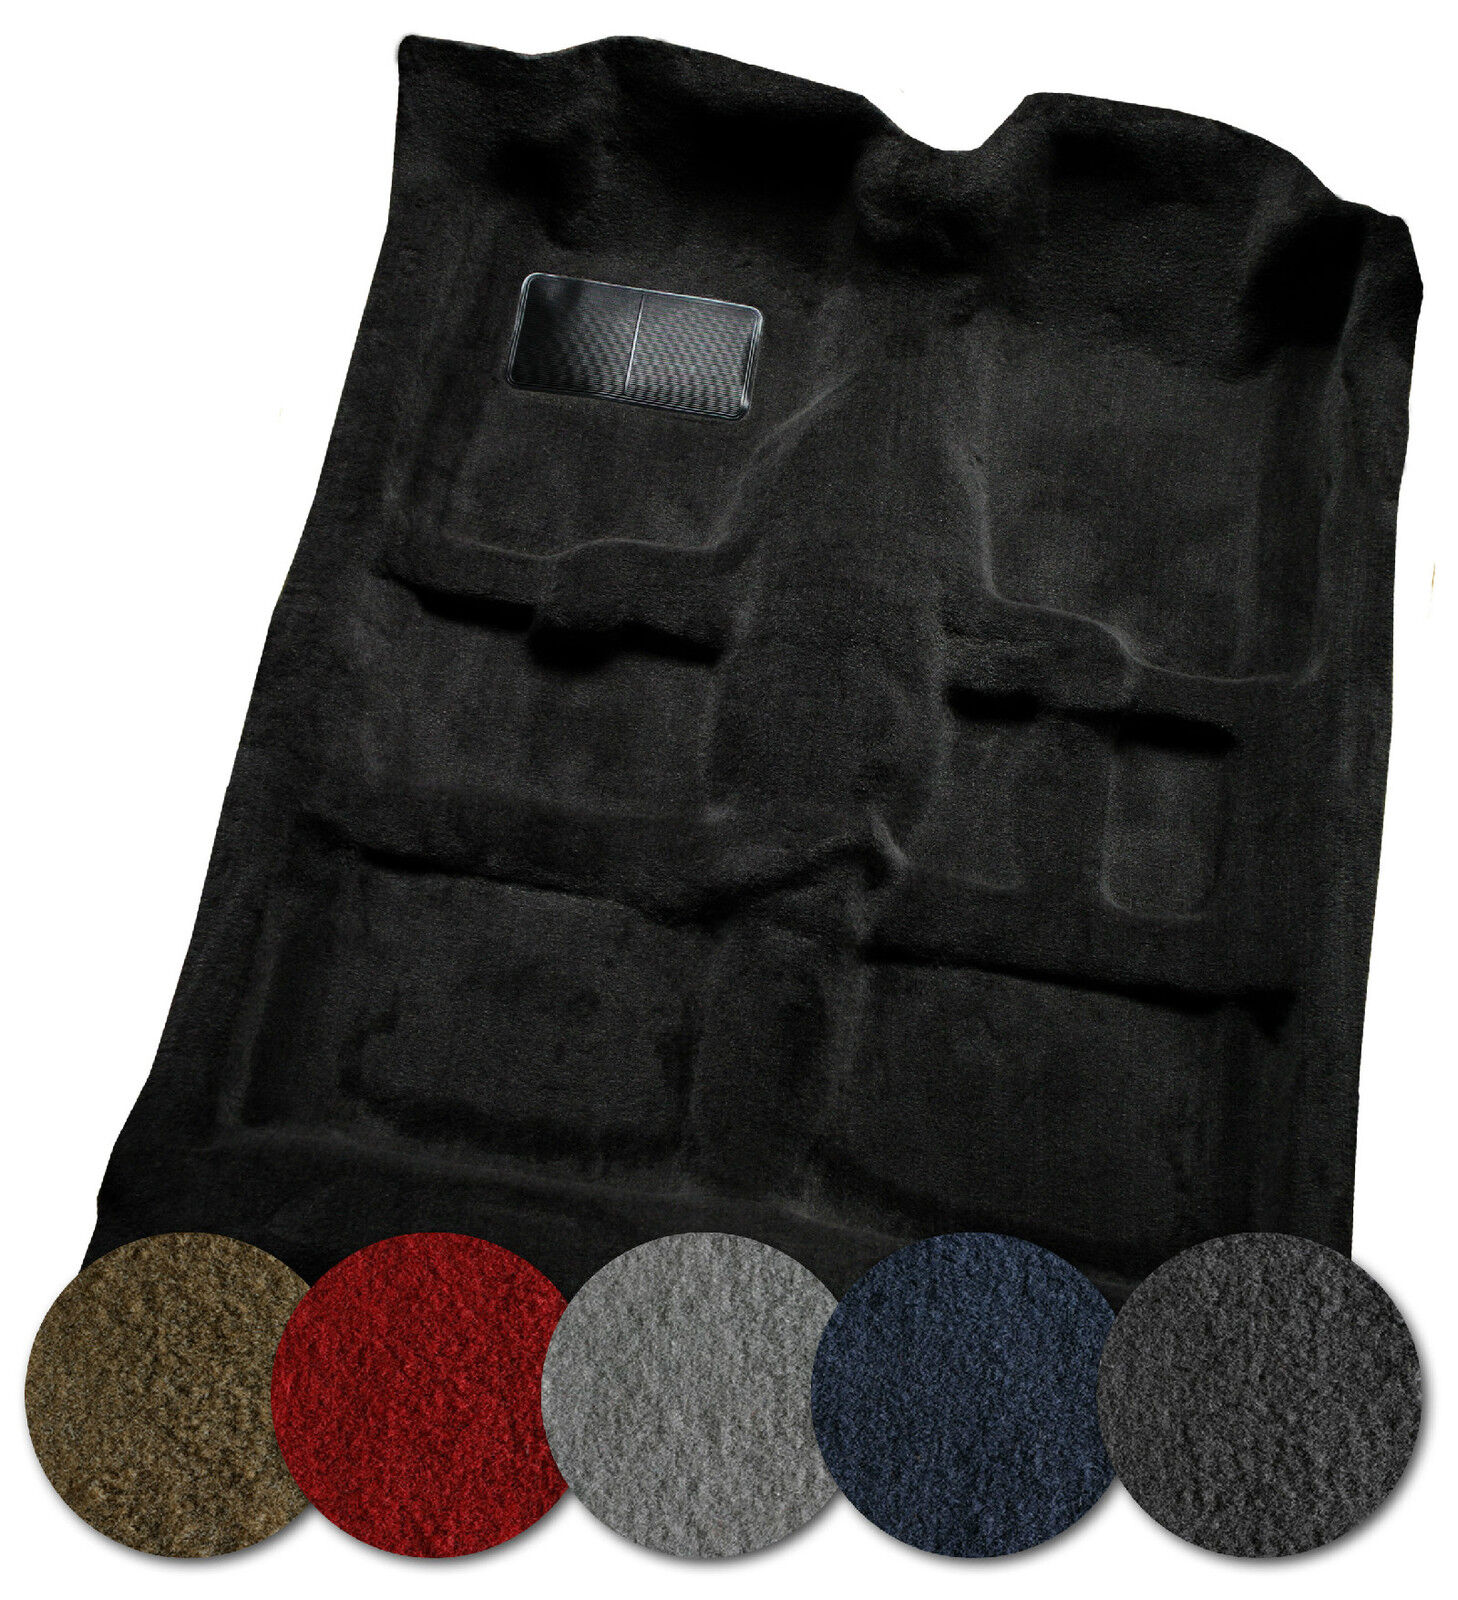 1963-1965 FORD FALCON 2DR HT BENCH SEAT CARPET - ANY COLOR